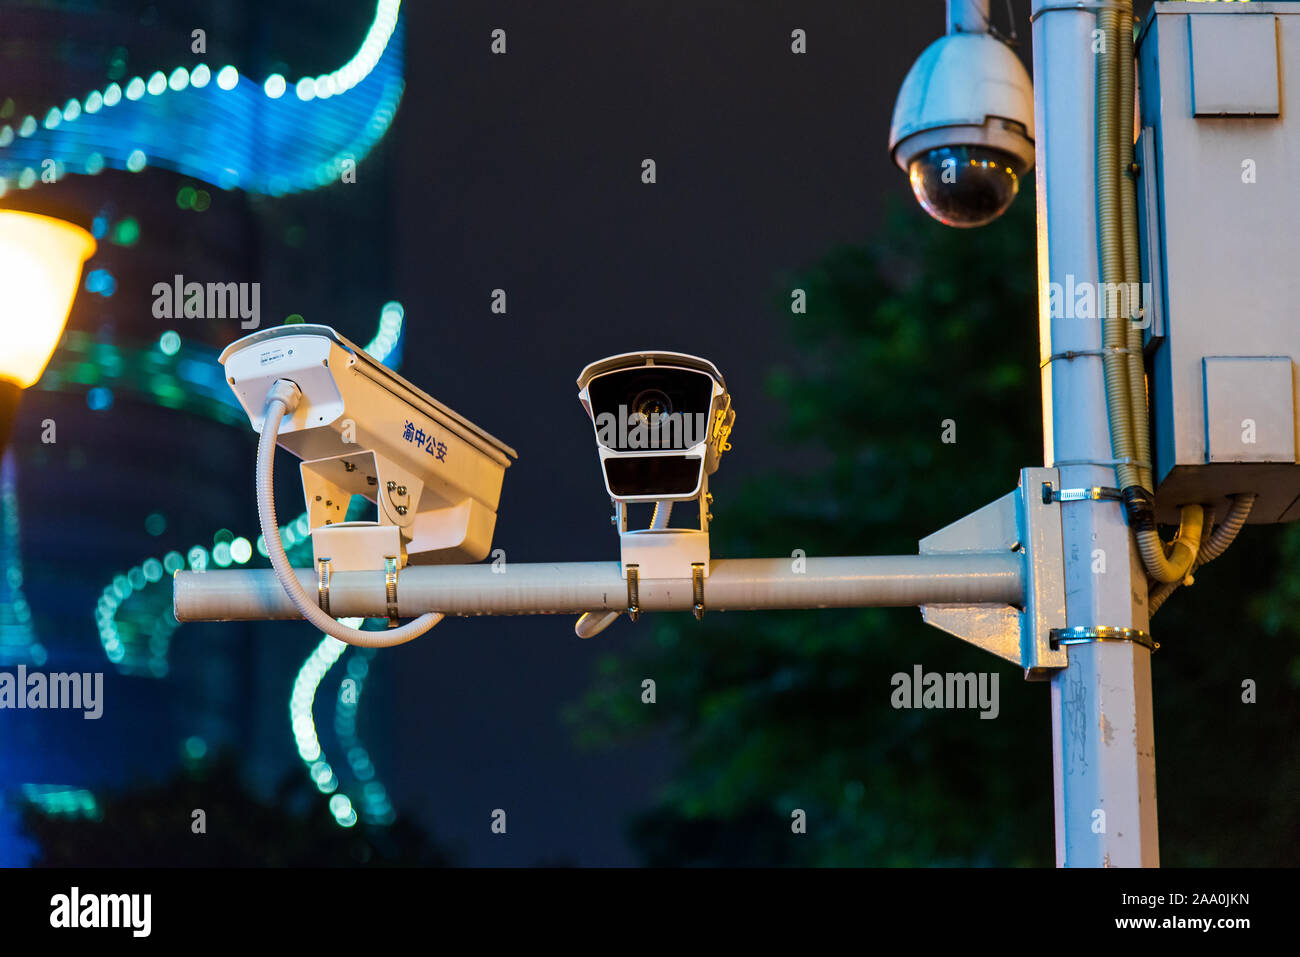 Chongqing, China - July 22, 2019: Surveillance CCTV camera on the street a common view in Chongqing, the city with the largest number of cameras in Ch Stock Photo